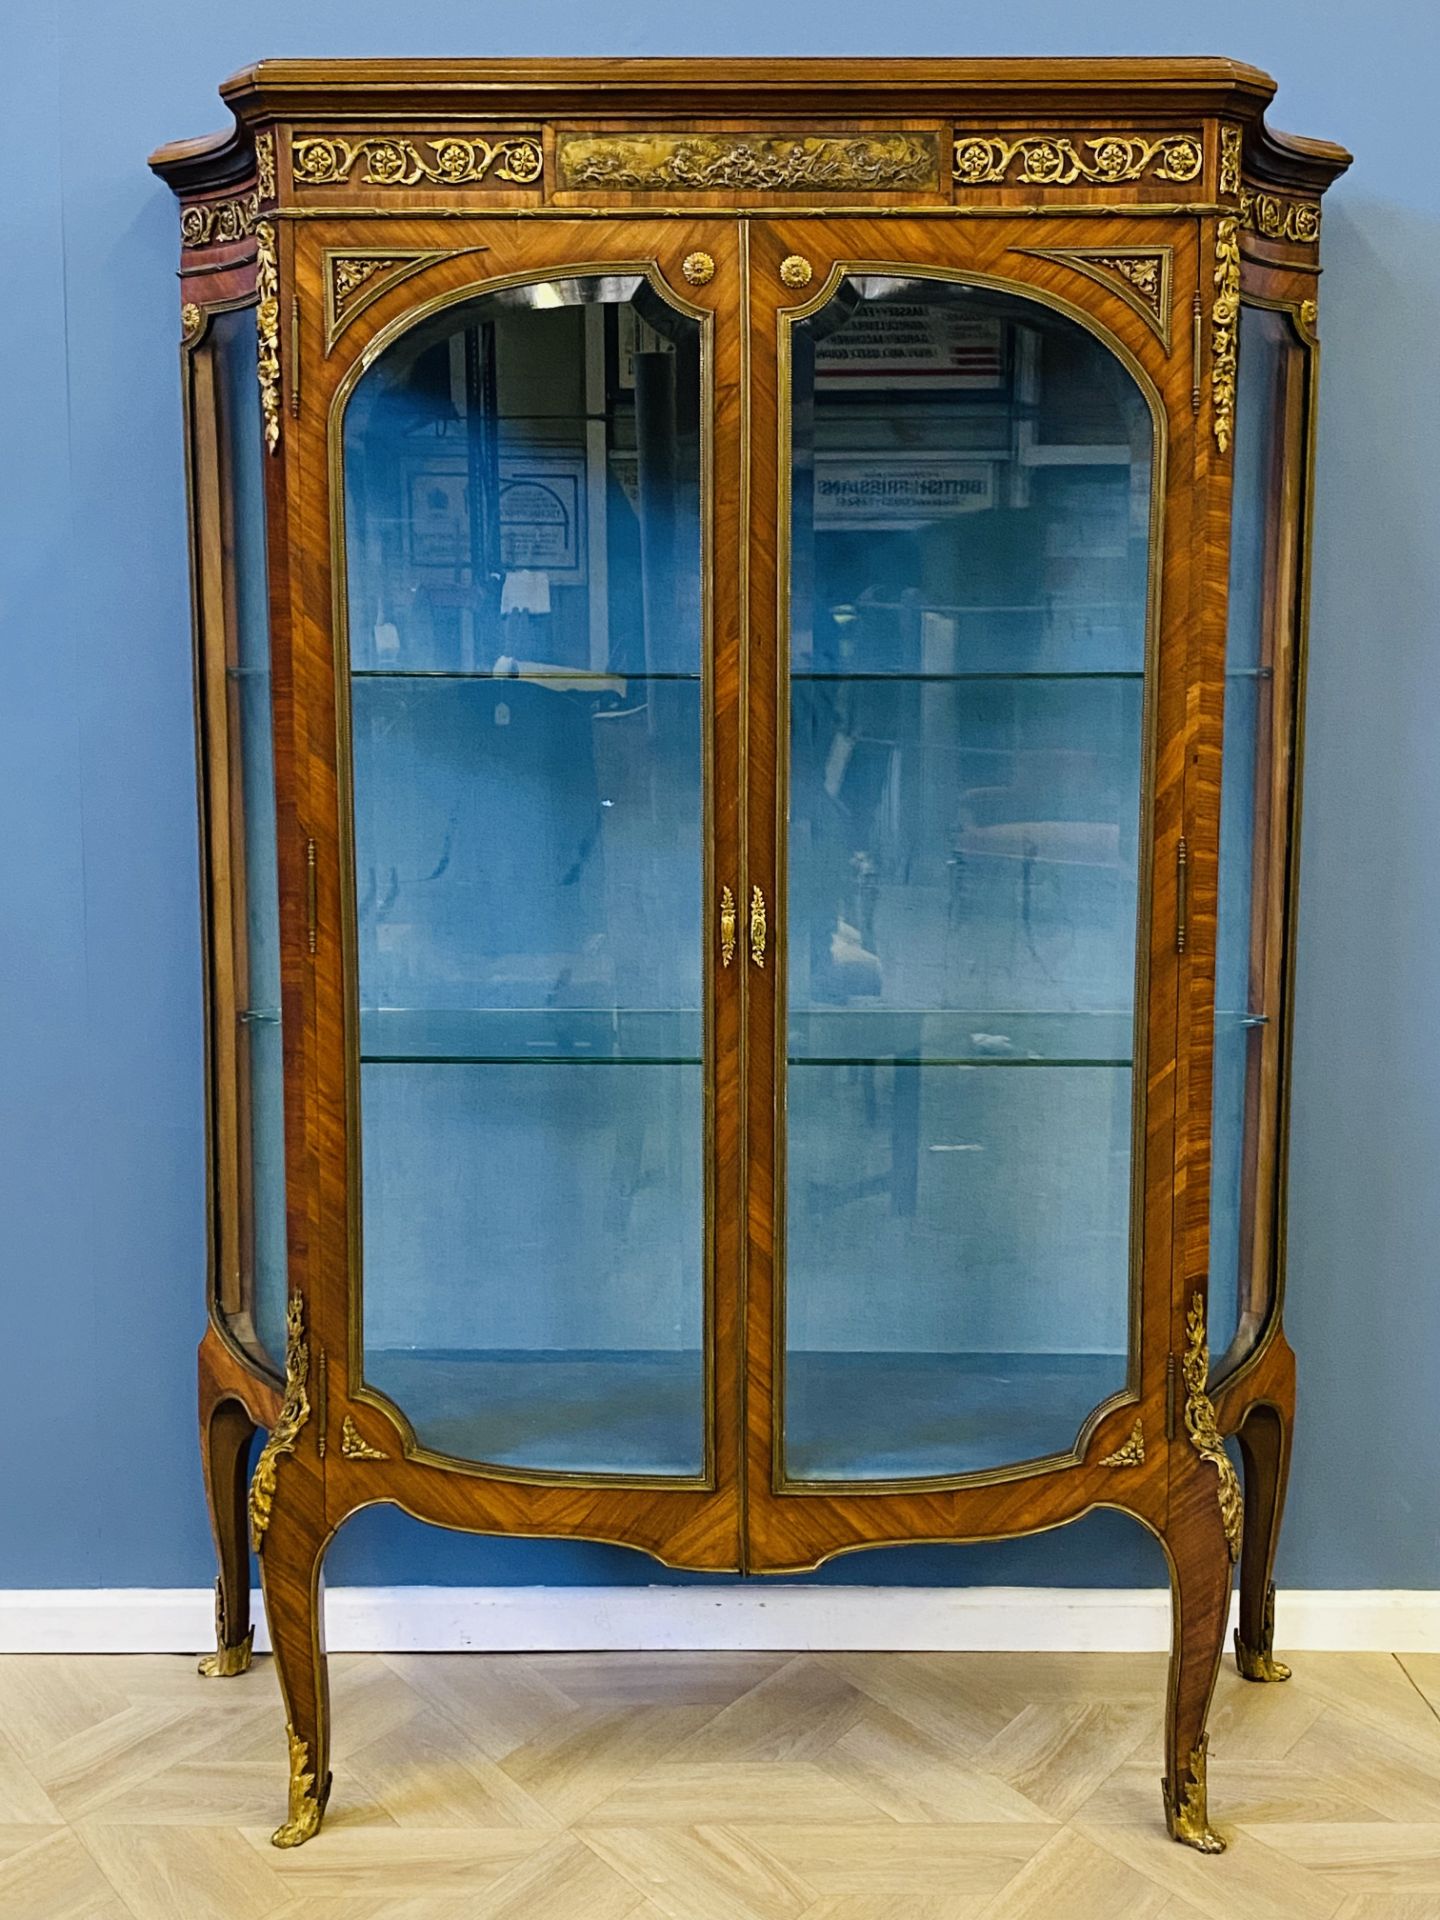 Late 19th century French kingwood and ormolu mounted two door vitrine - Image 5 of 7